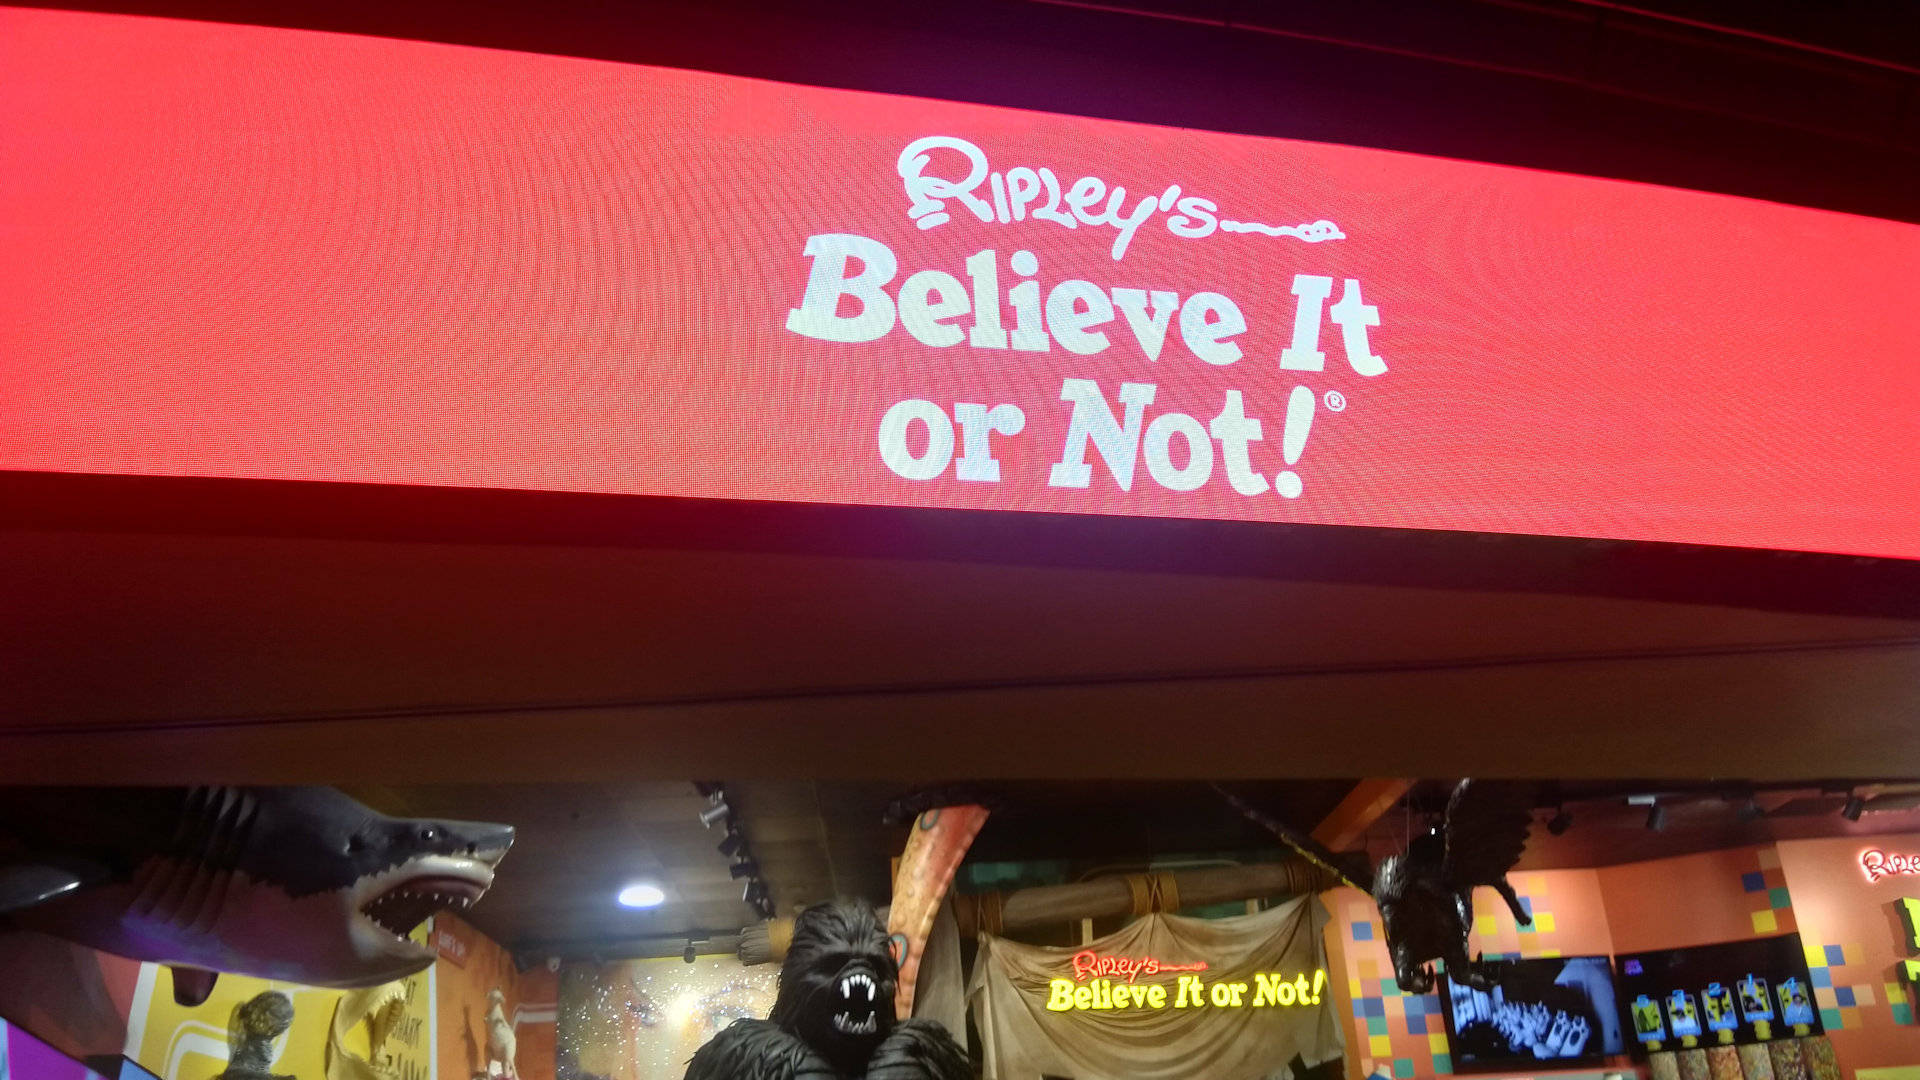 Ripley's Believe It Or Not entrance at Surface Paradise, Gold Coast